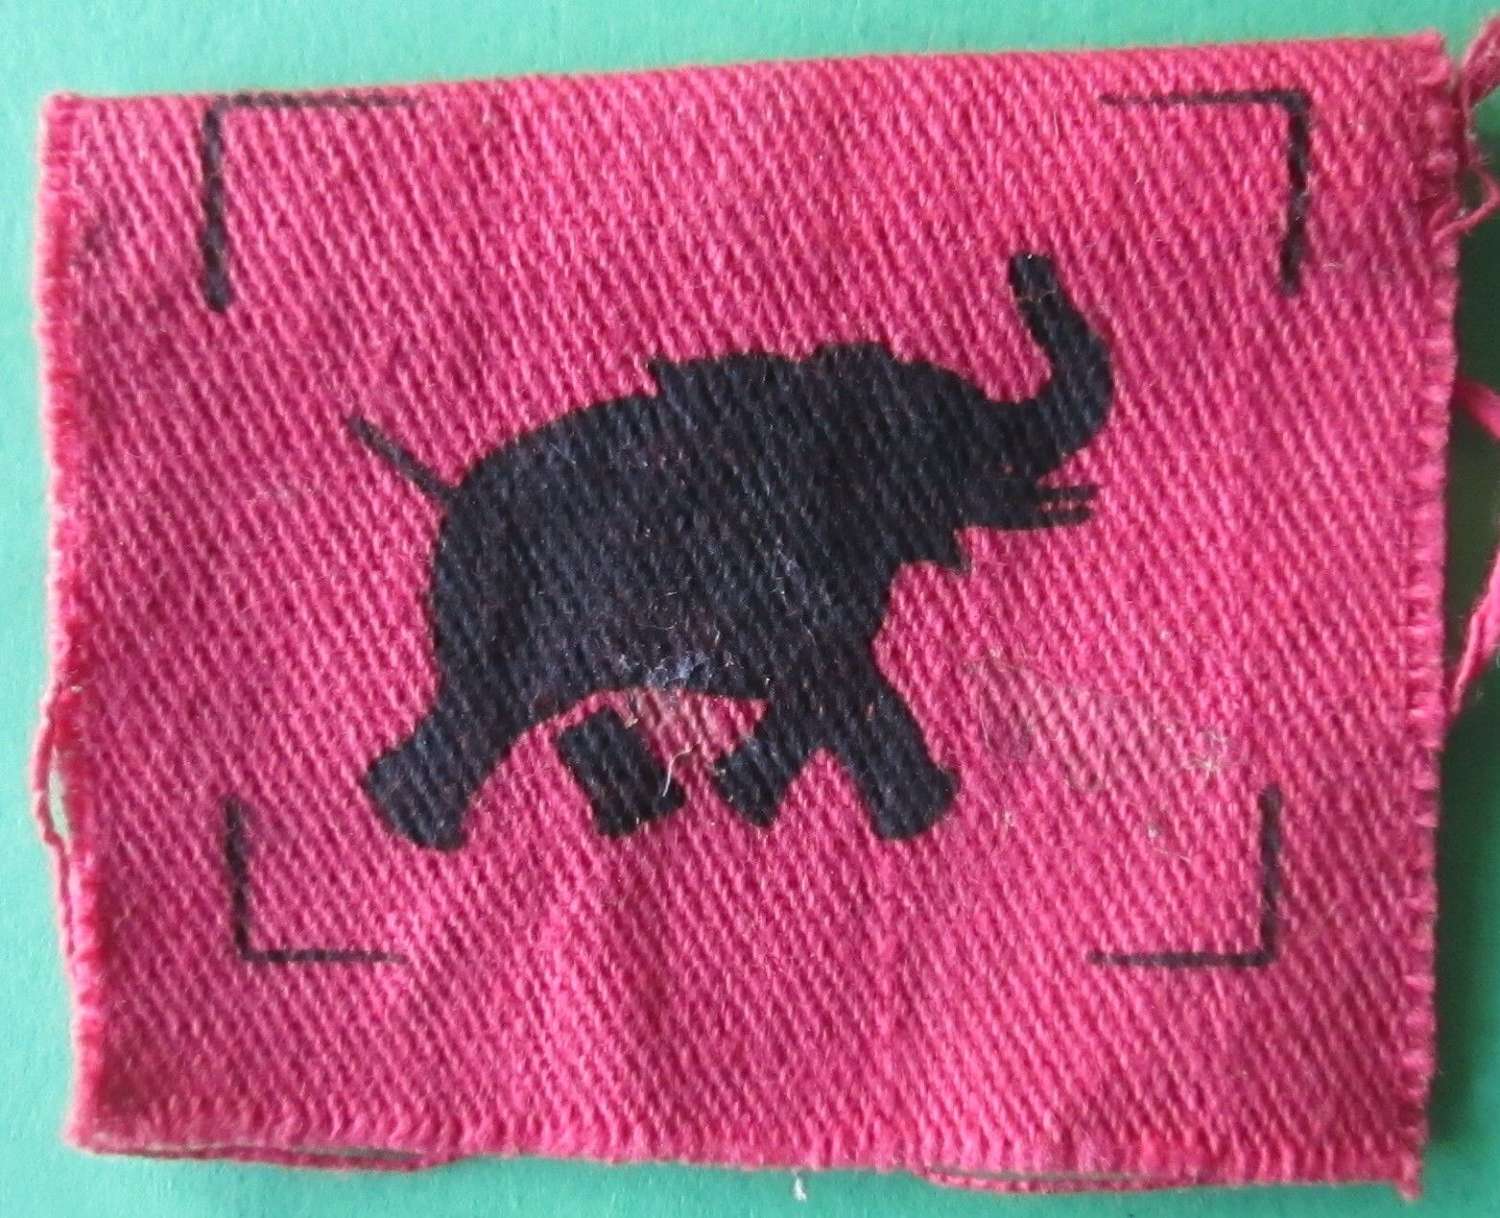 A IV CORPS FORMATION SIGN OF THE BLACK ELEPHANT ON A RED RECTANGLE